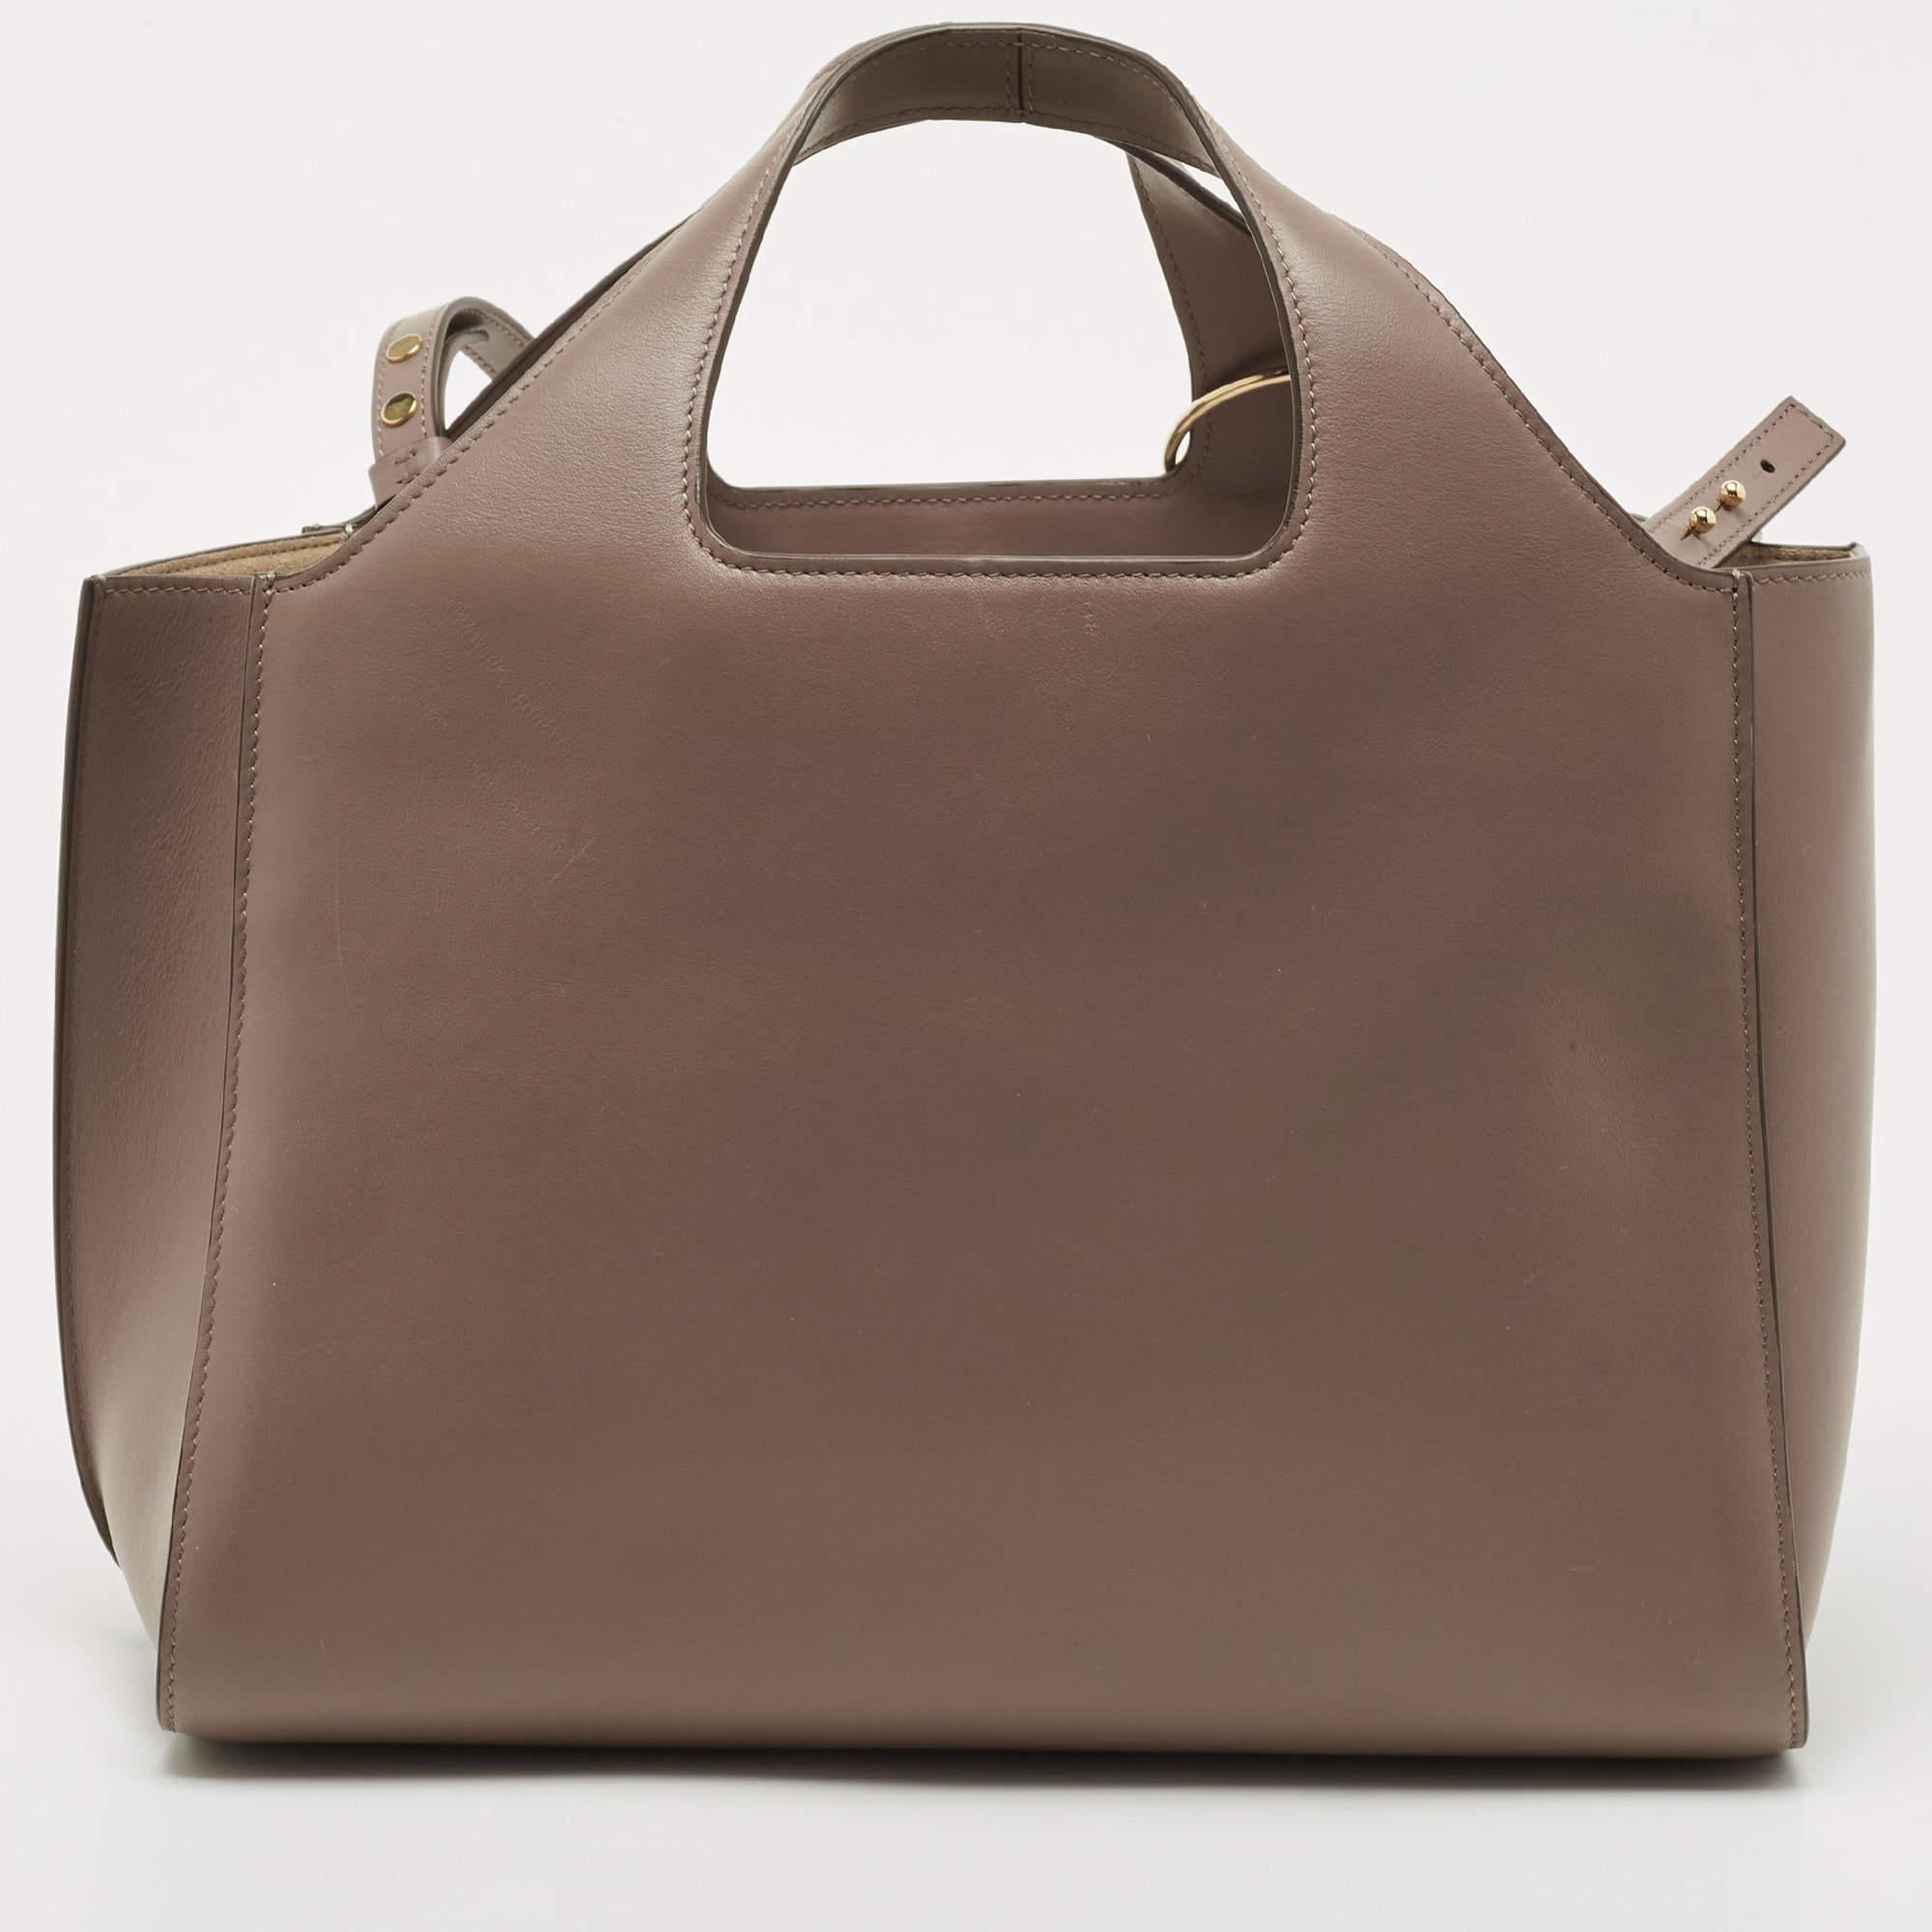 Be it your daily commute to work, shopping sprees, and vacations, a Victoria Beckham tote bag will never fail you. This designer creation is made to last and assist you in your fashion-filled days.

Includes: Original Dustbag, Info Booklet, Brand